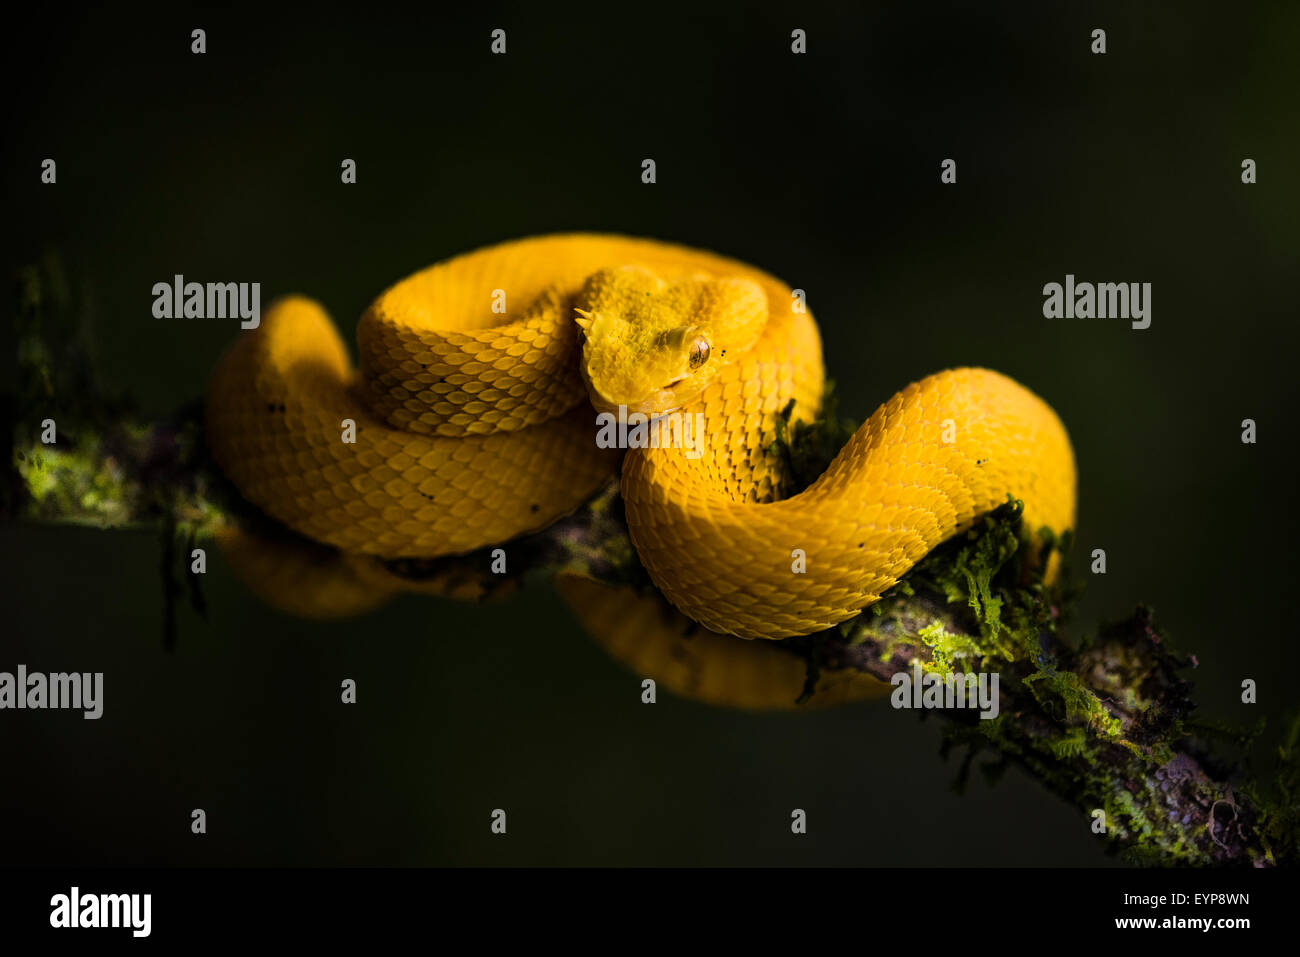 An Eyelash Pit Viper in a Costa Rica forest Stock Photo